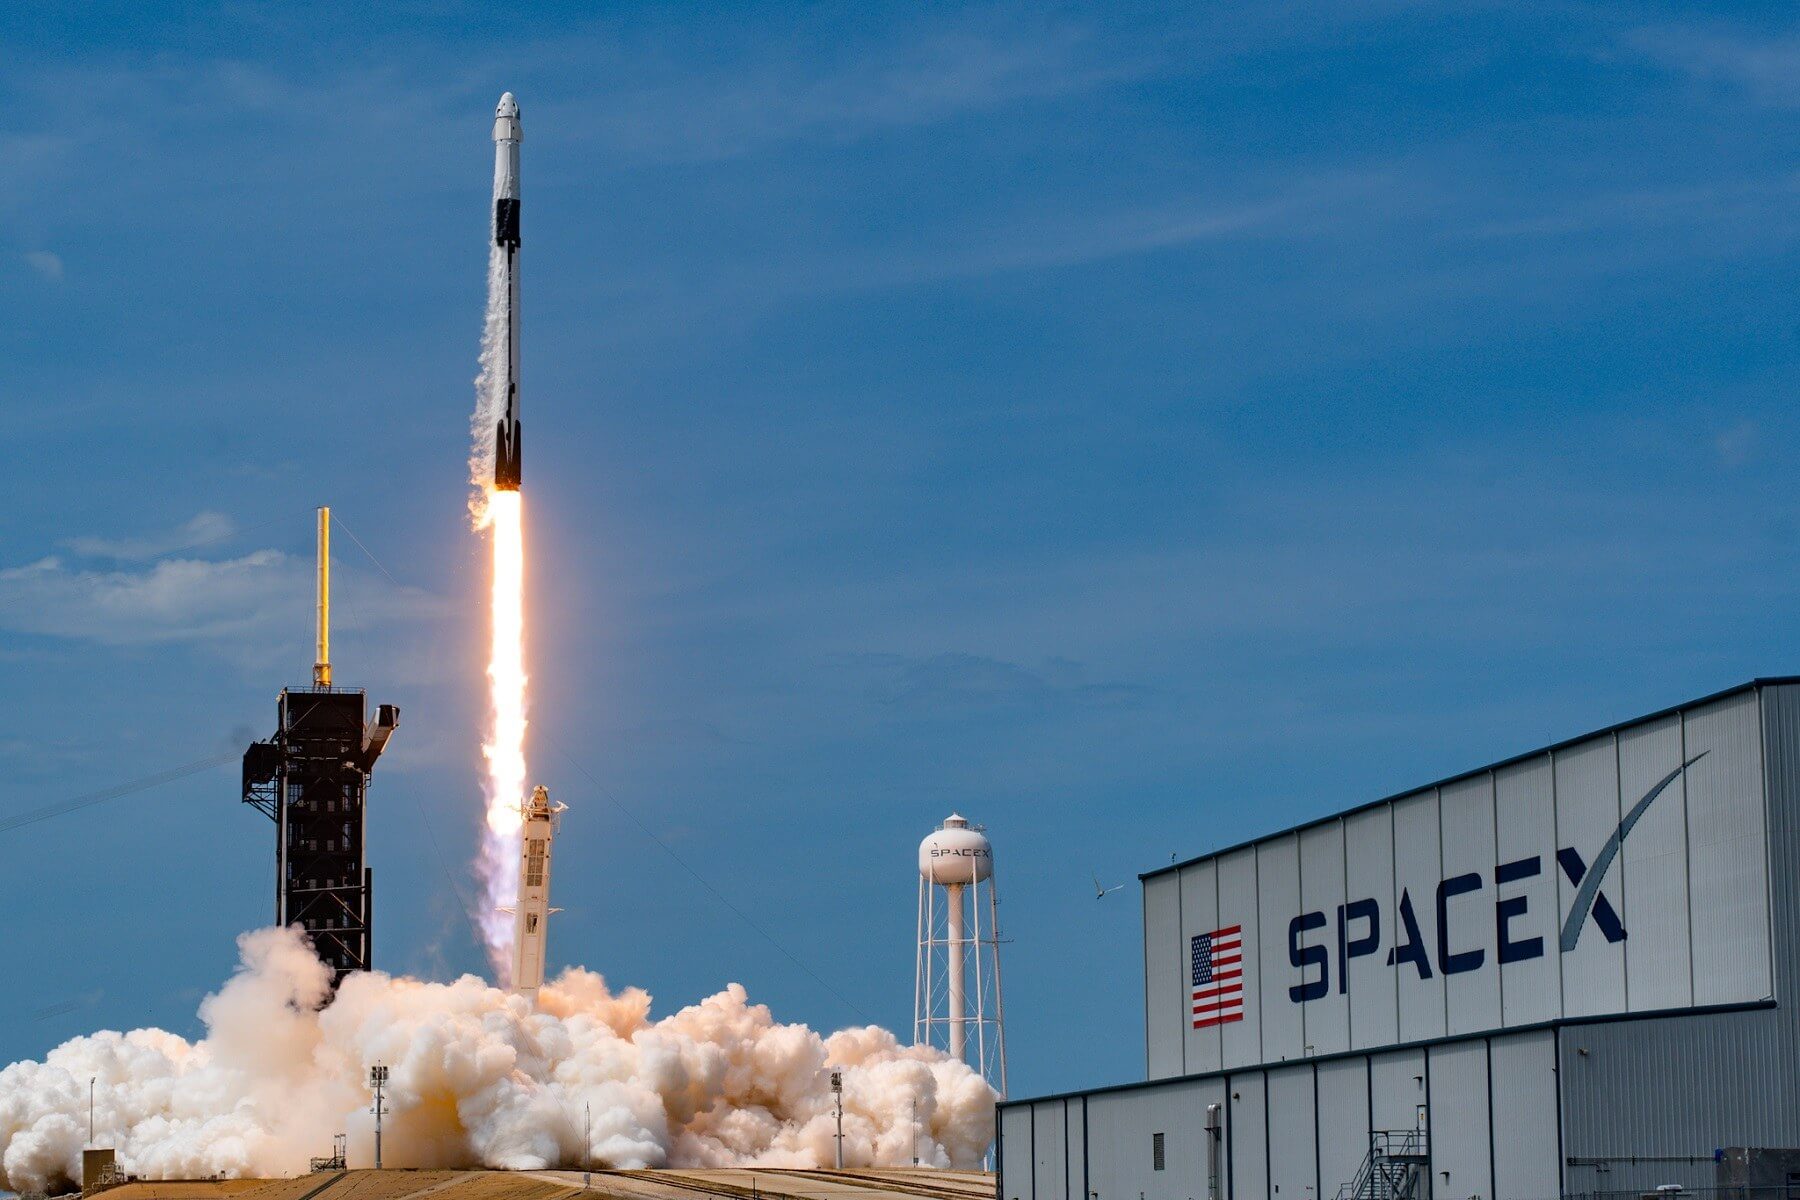 Making history: the SpaceX launch, ISS dock, and a false copyright claim